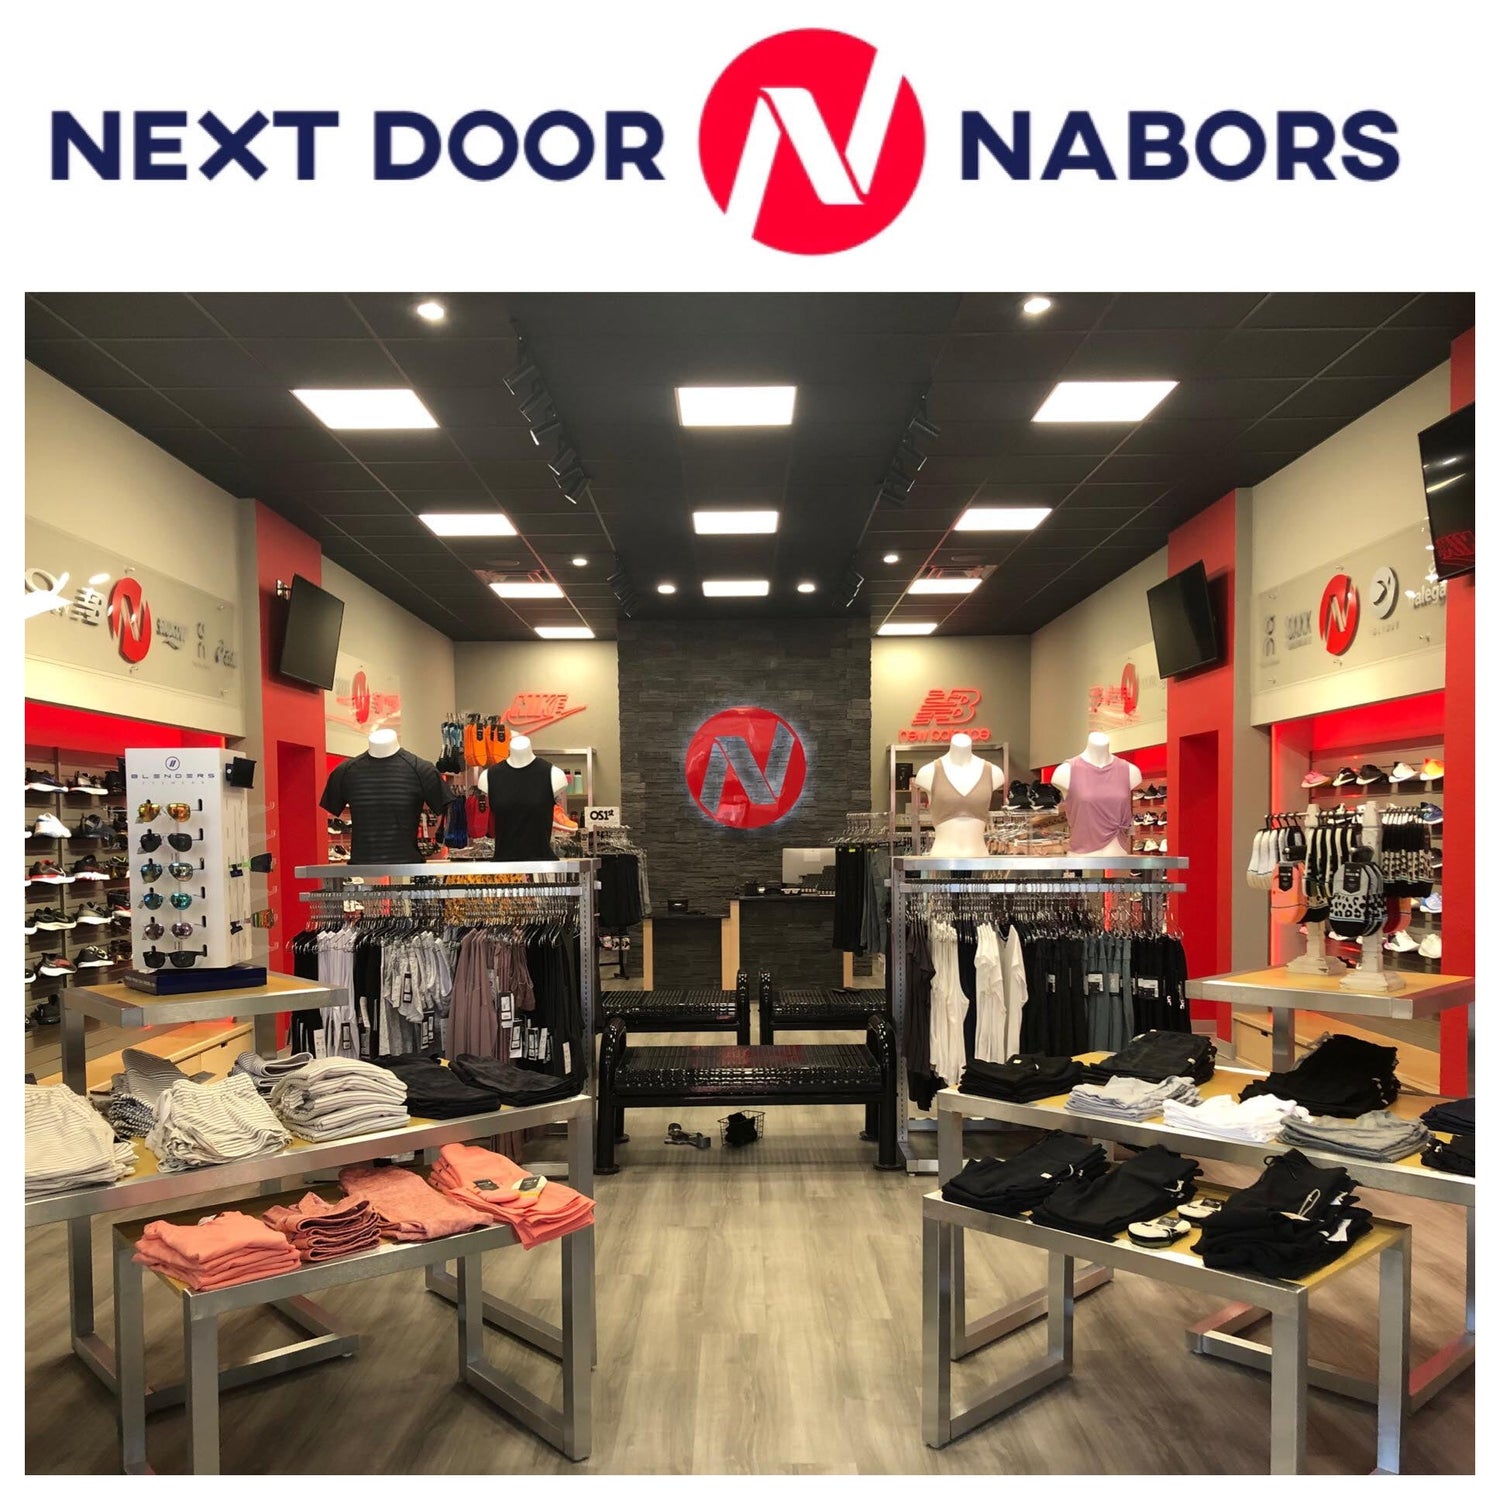 in store Next Door Nabors with products such as apparel and shoes